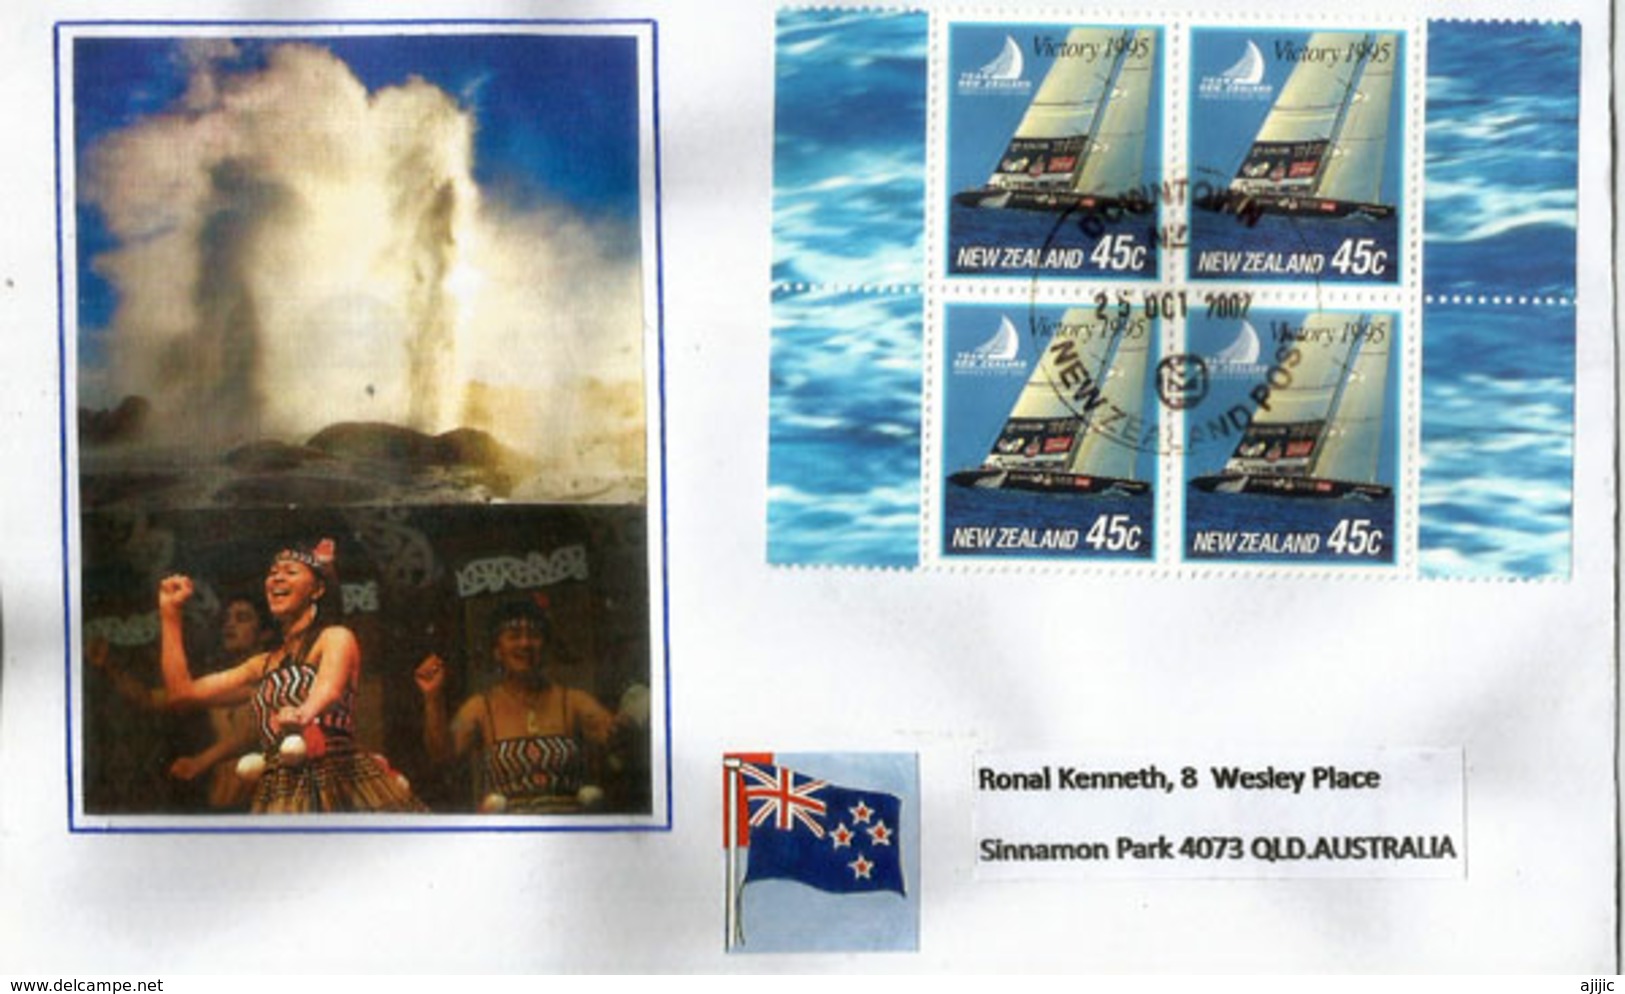 Team New-Zealand Sailing Team Black Magic, Letter From New-Zealand Sent To Australia - Covers & Documents